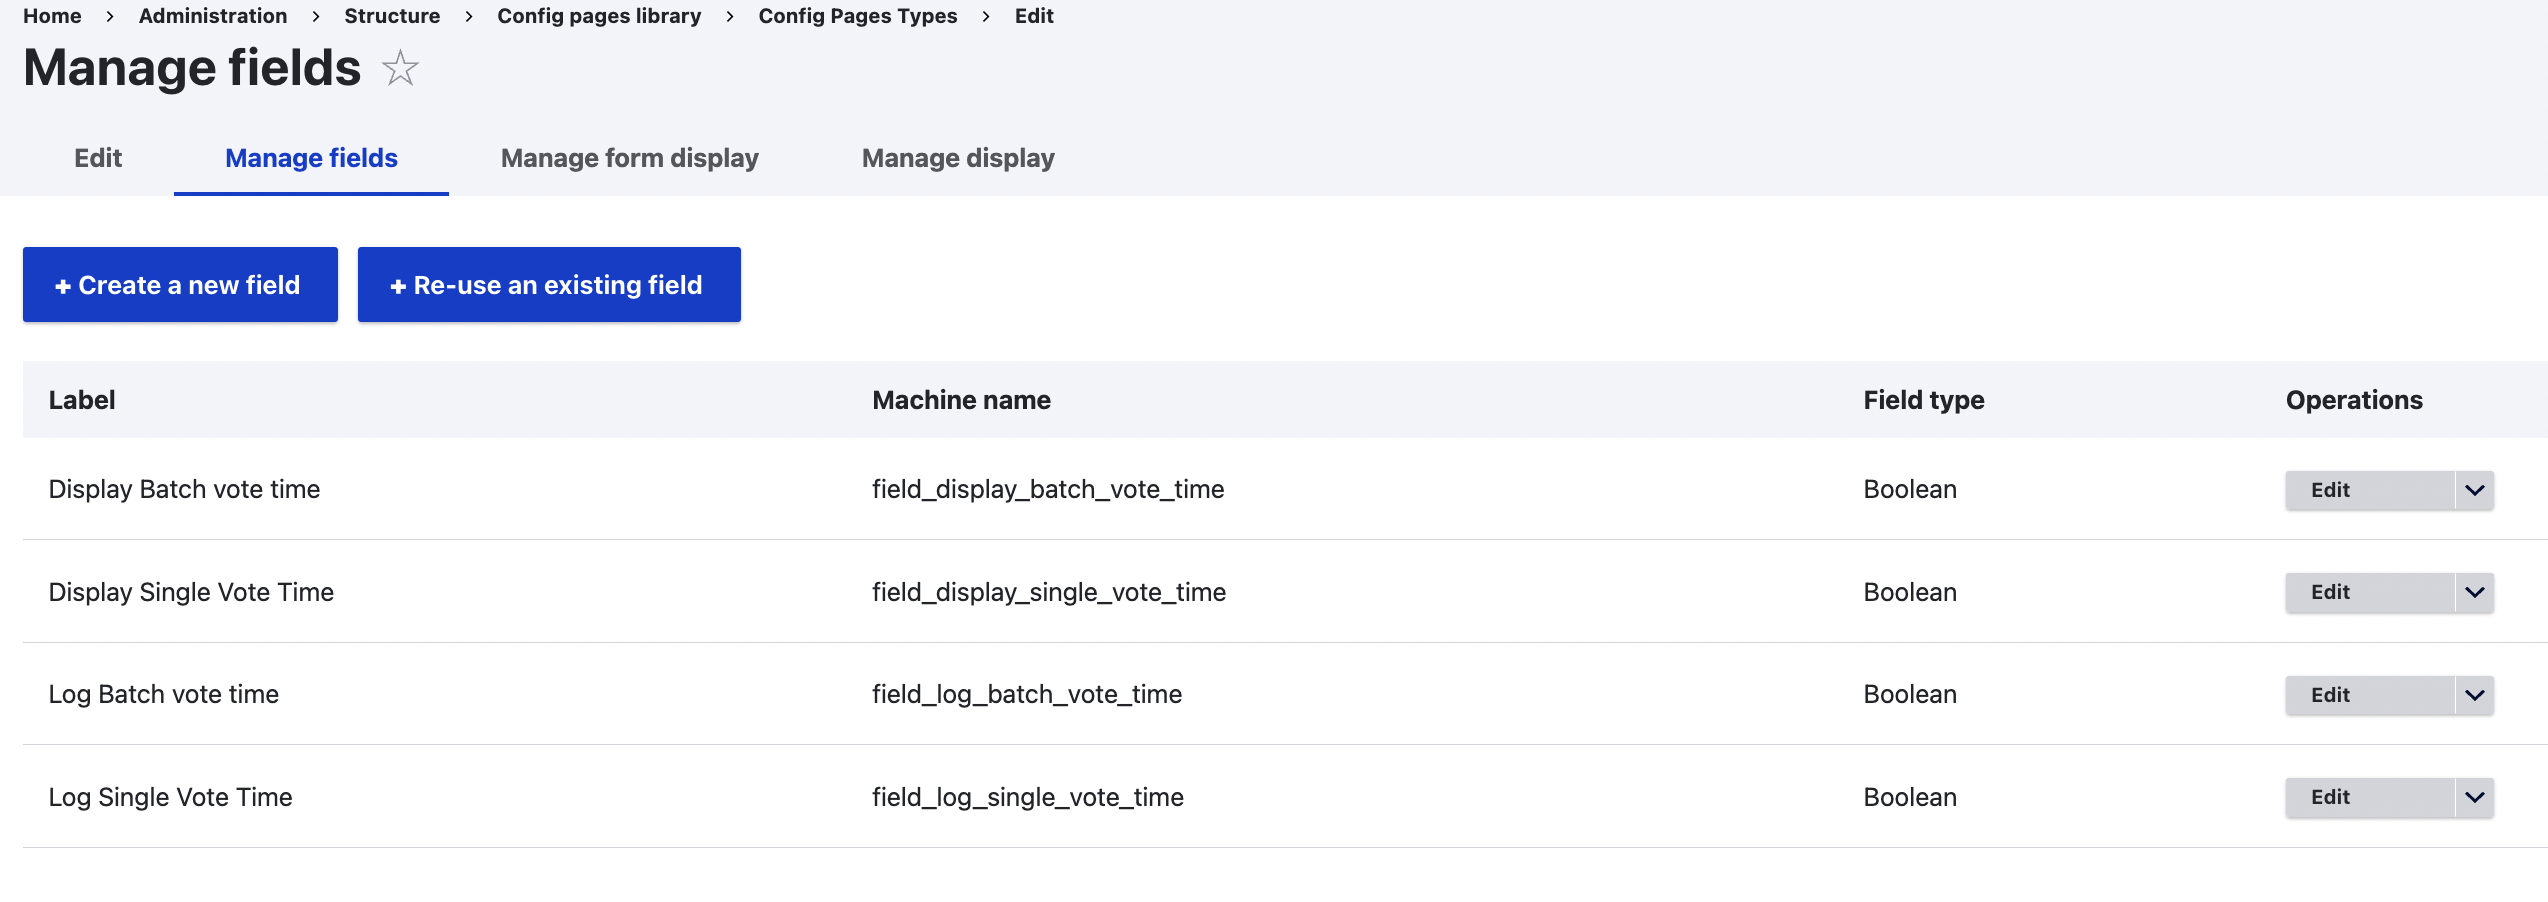 Fields defined for a config in Config Pages